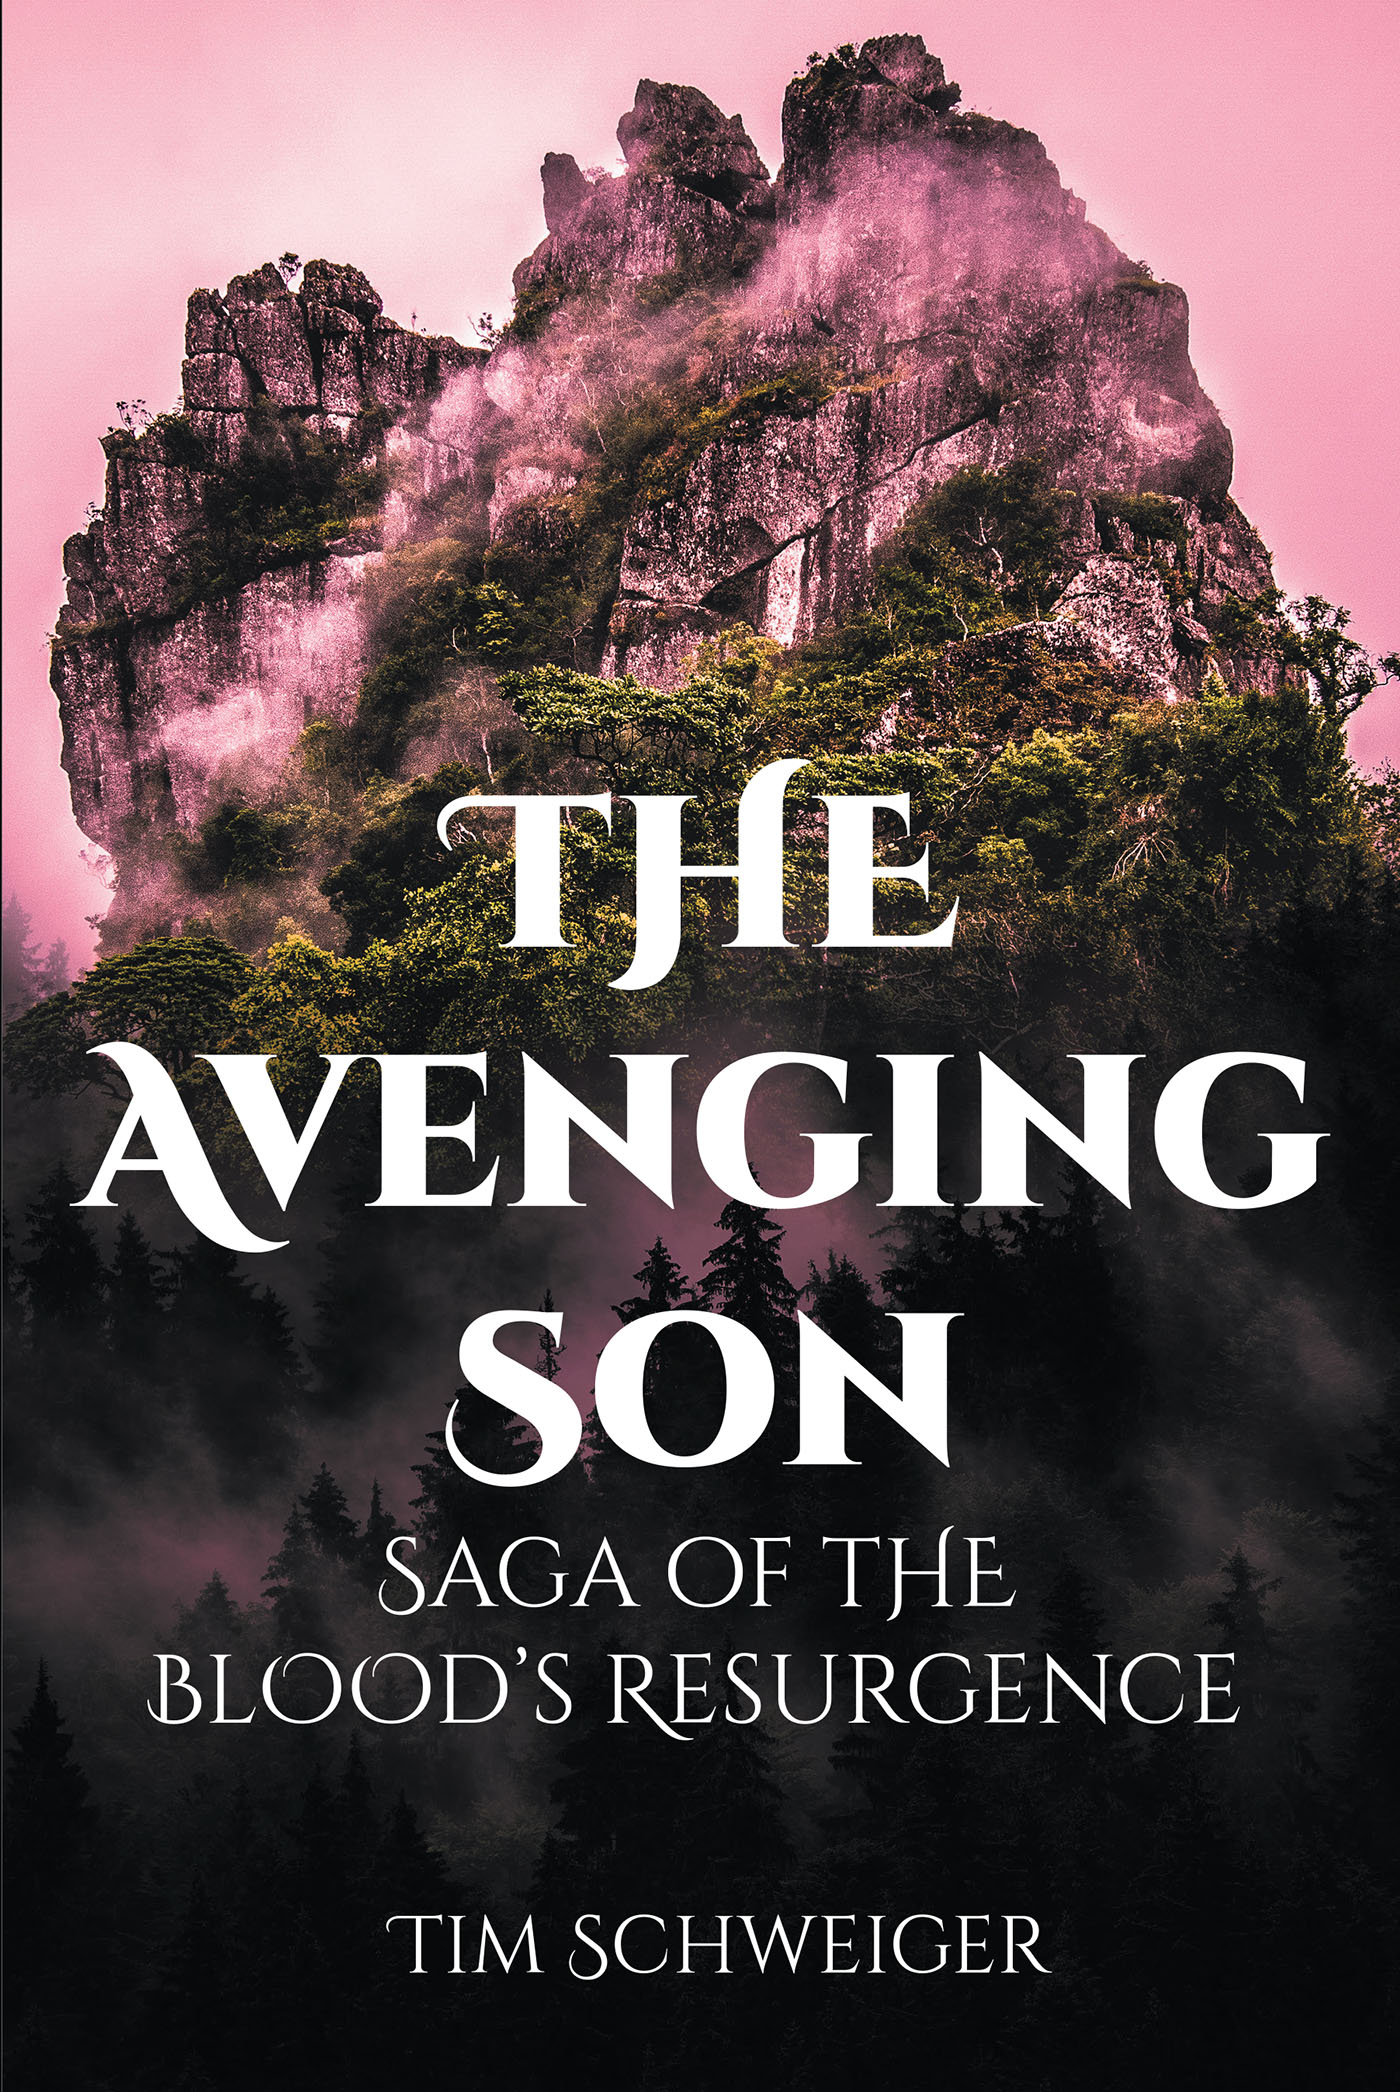 Author Tim Schweiger’s New Book, "The Avenging Son: Saga of the Blood’s Resurgence," is an Action-Packed Fantasy Novel About Twins Discovering Their Destiny